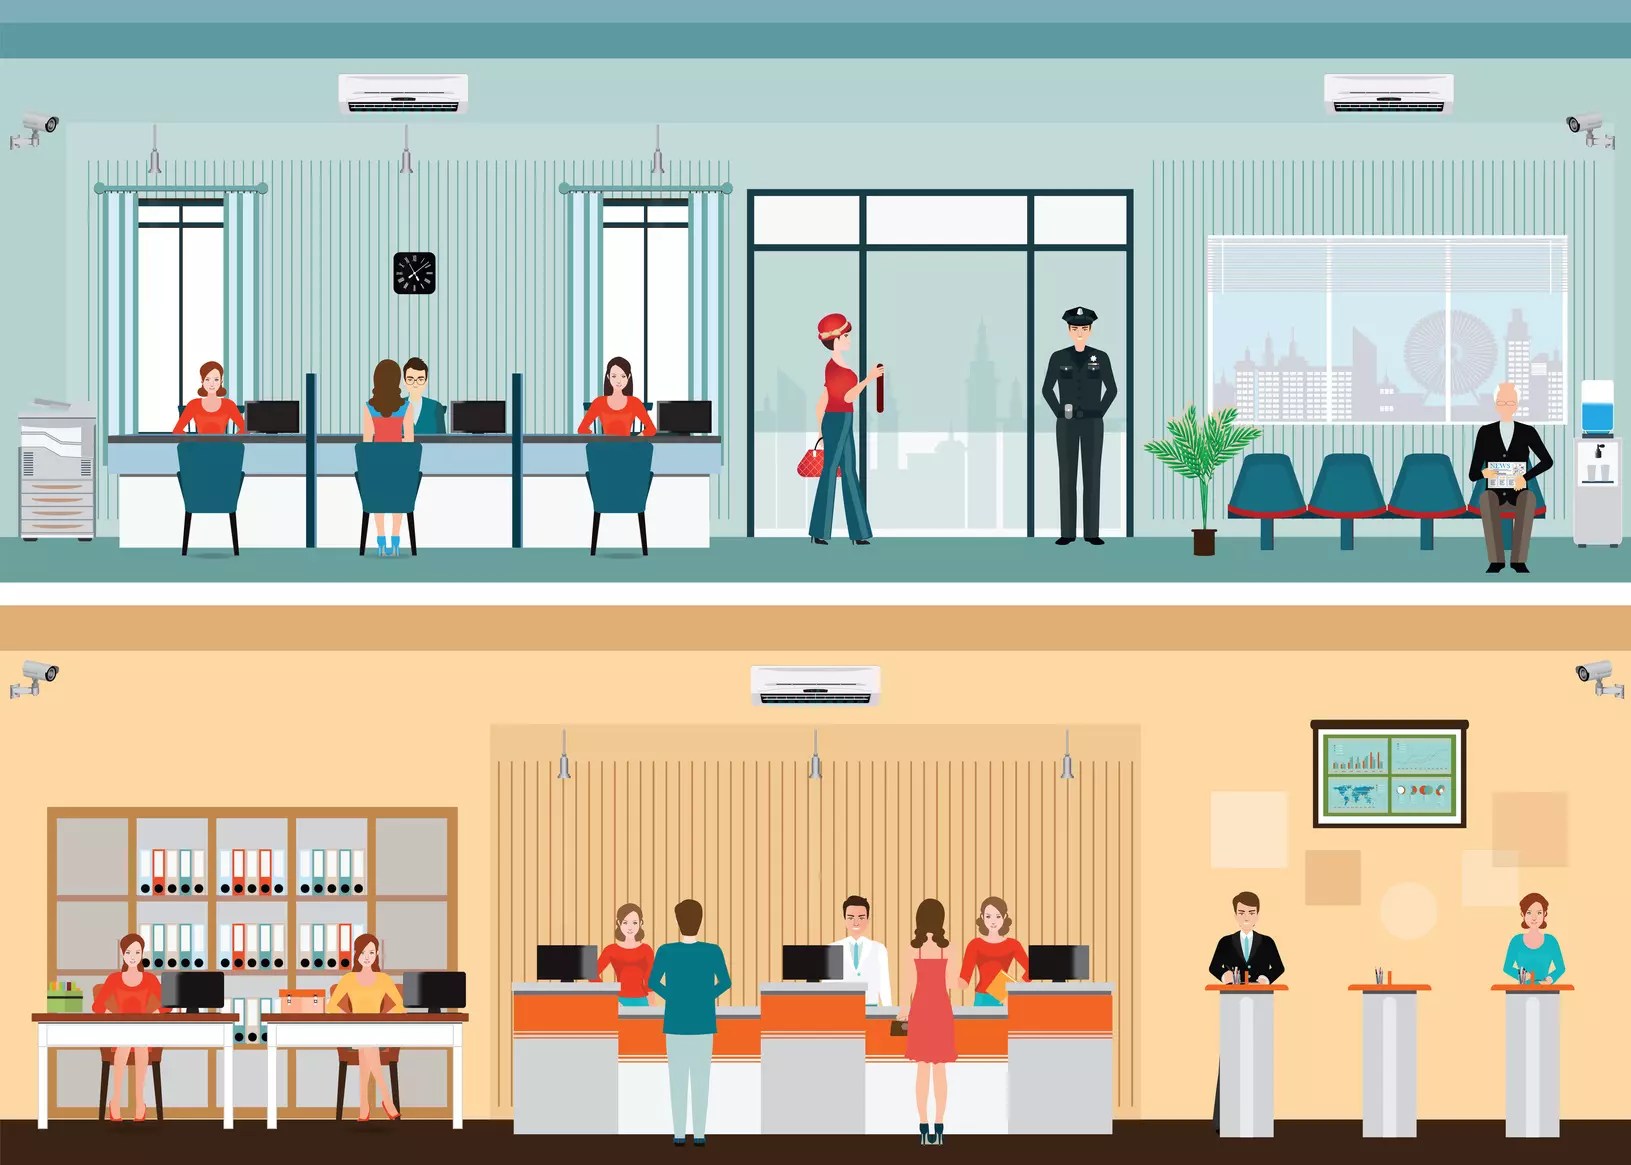 The Future Of Retail Banking